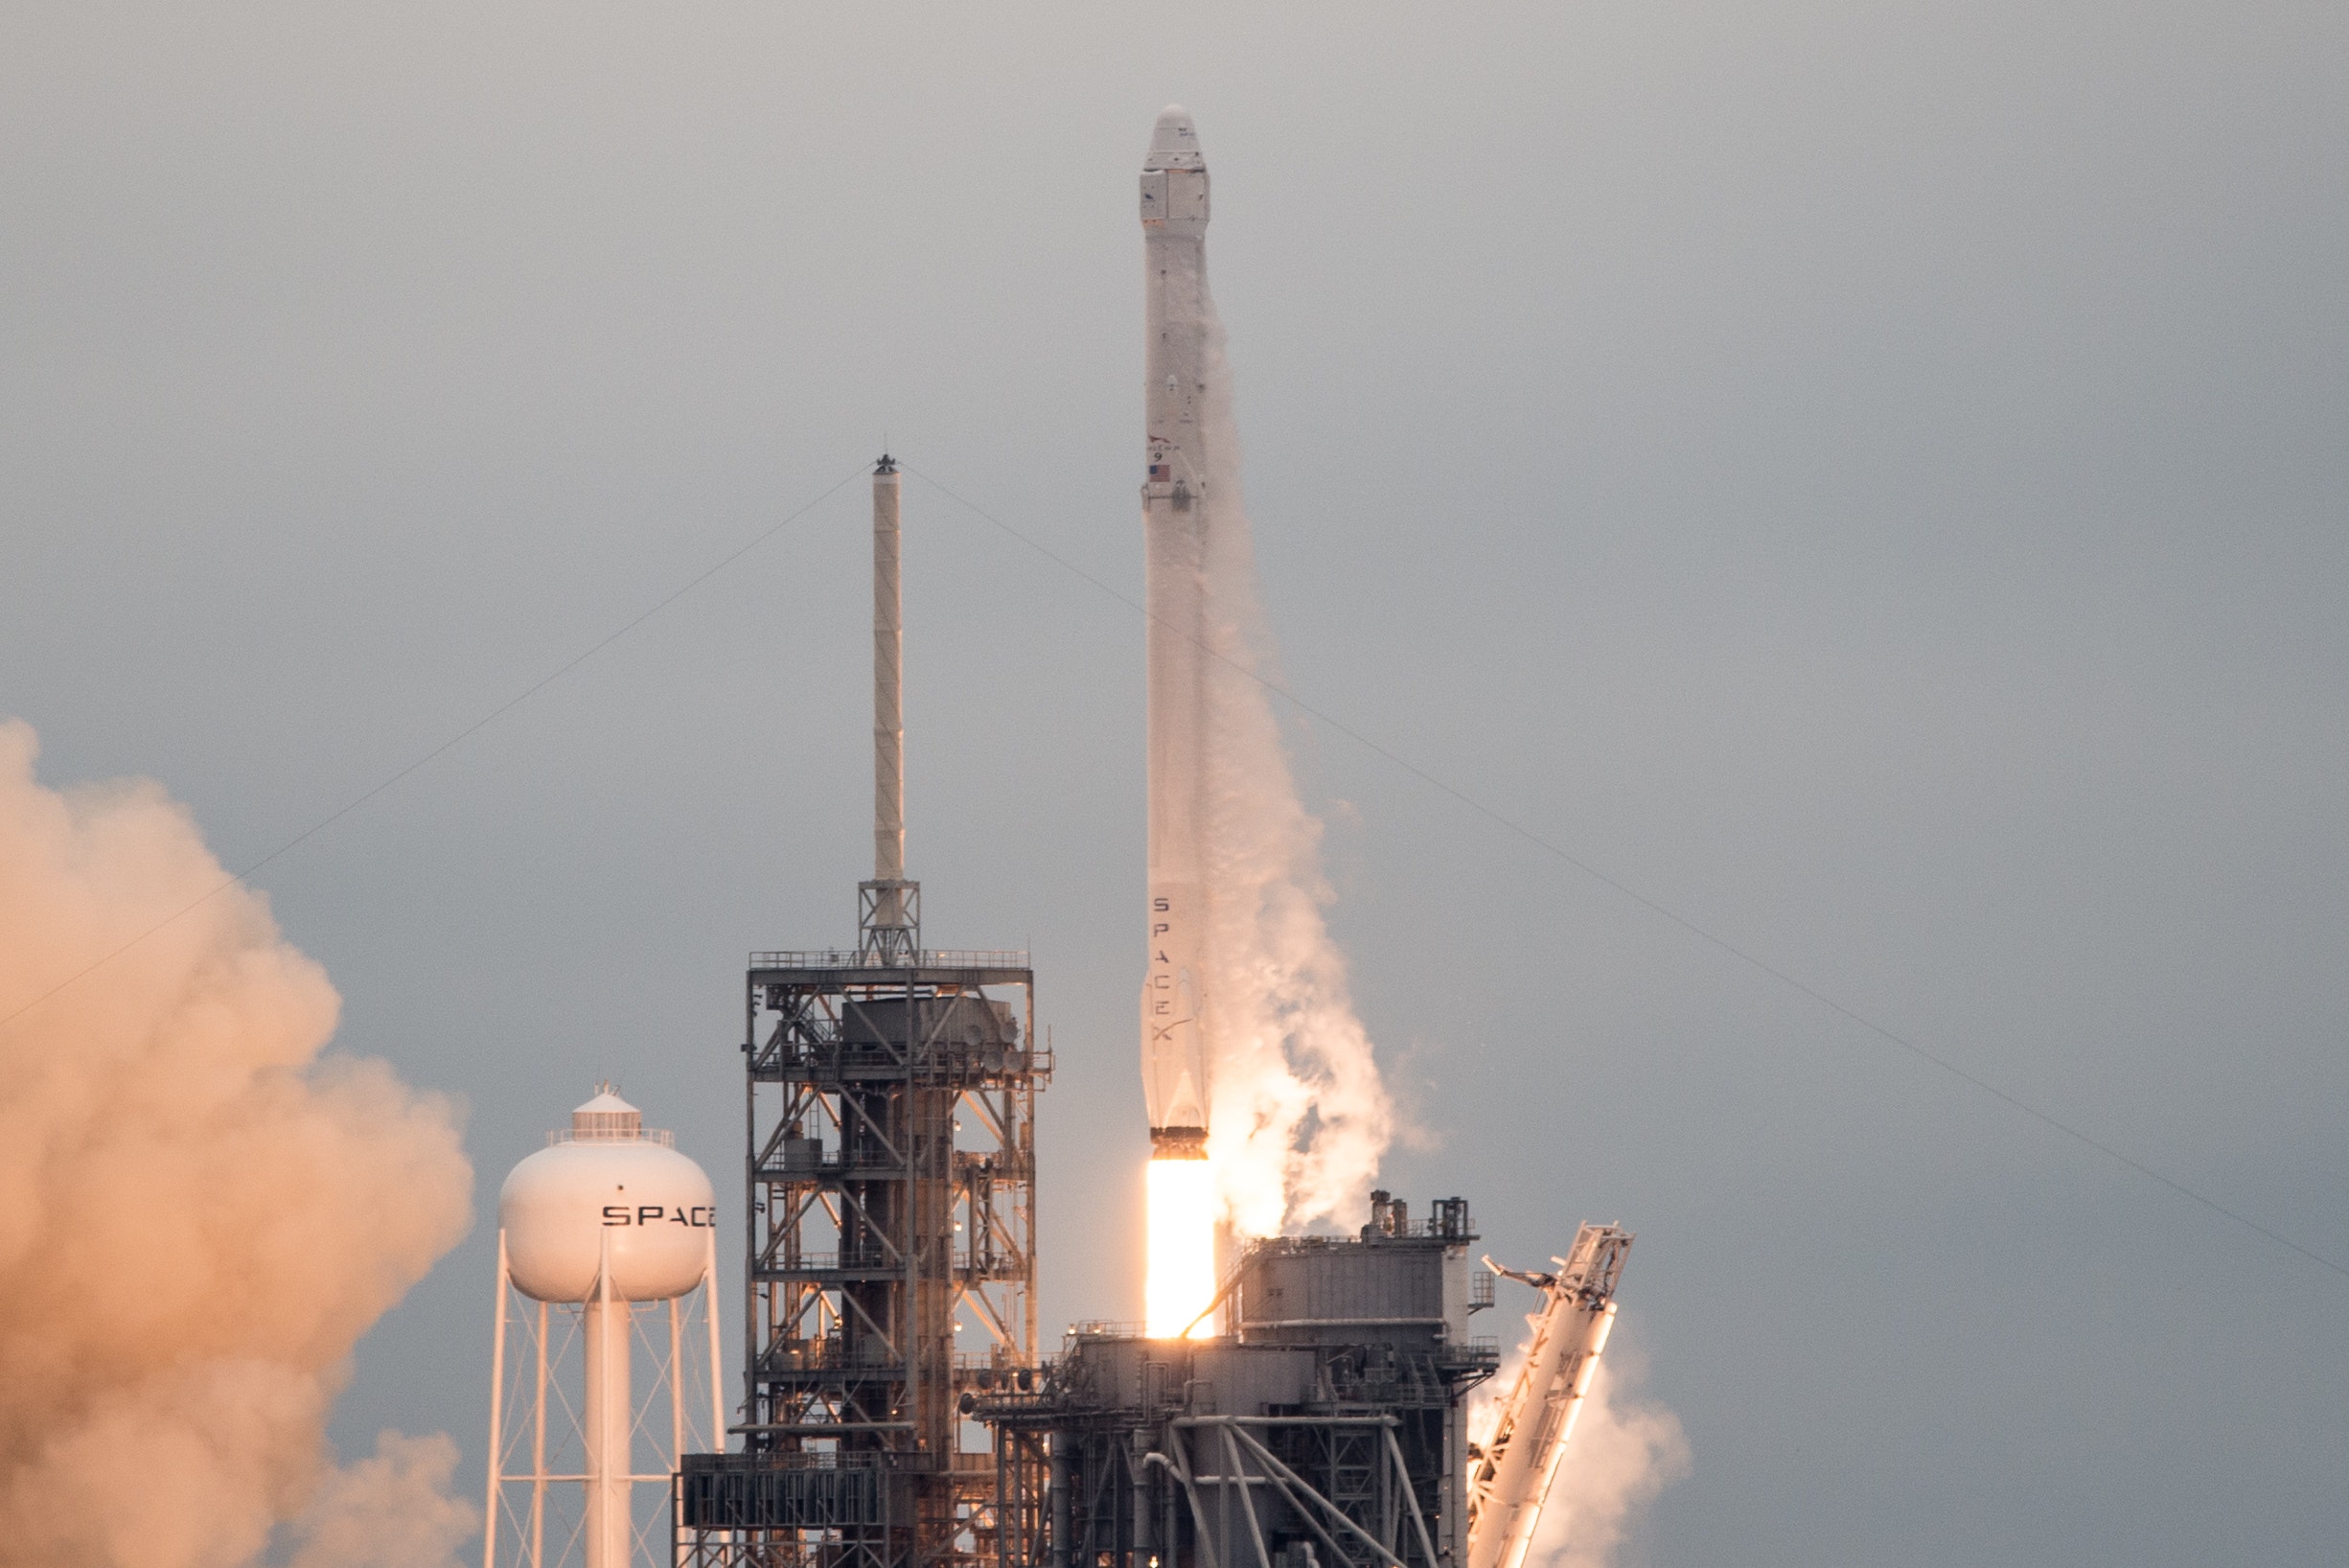 Watch: Elon Musk's SpaceX Launches 5,800-Pound ISS Cargo Resupply On Falcon 9 Rocket